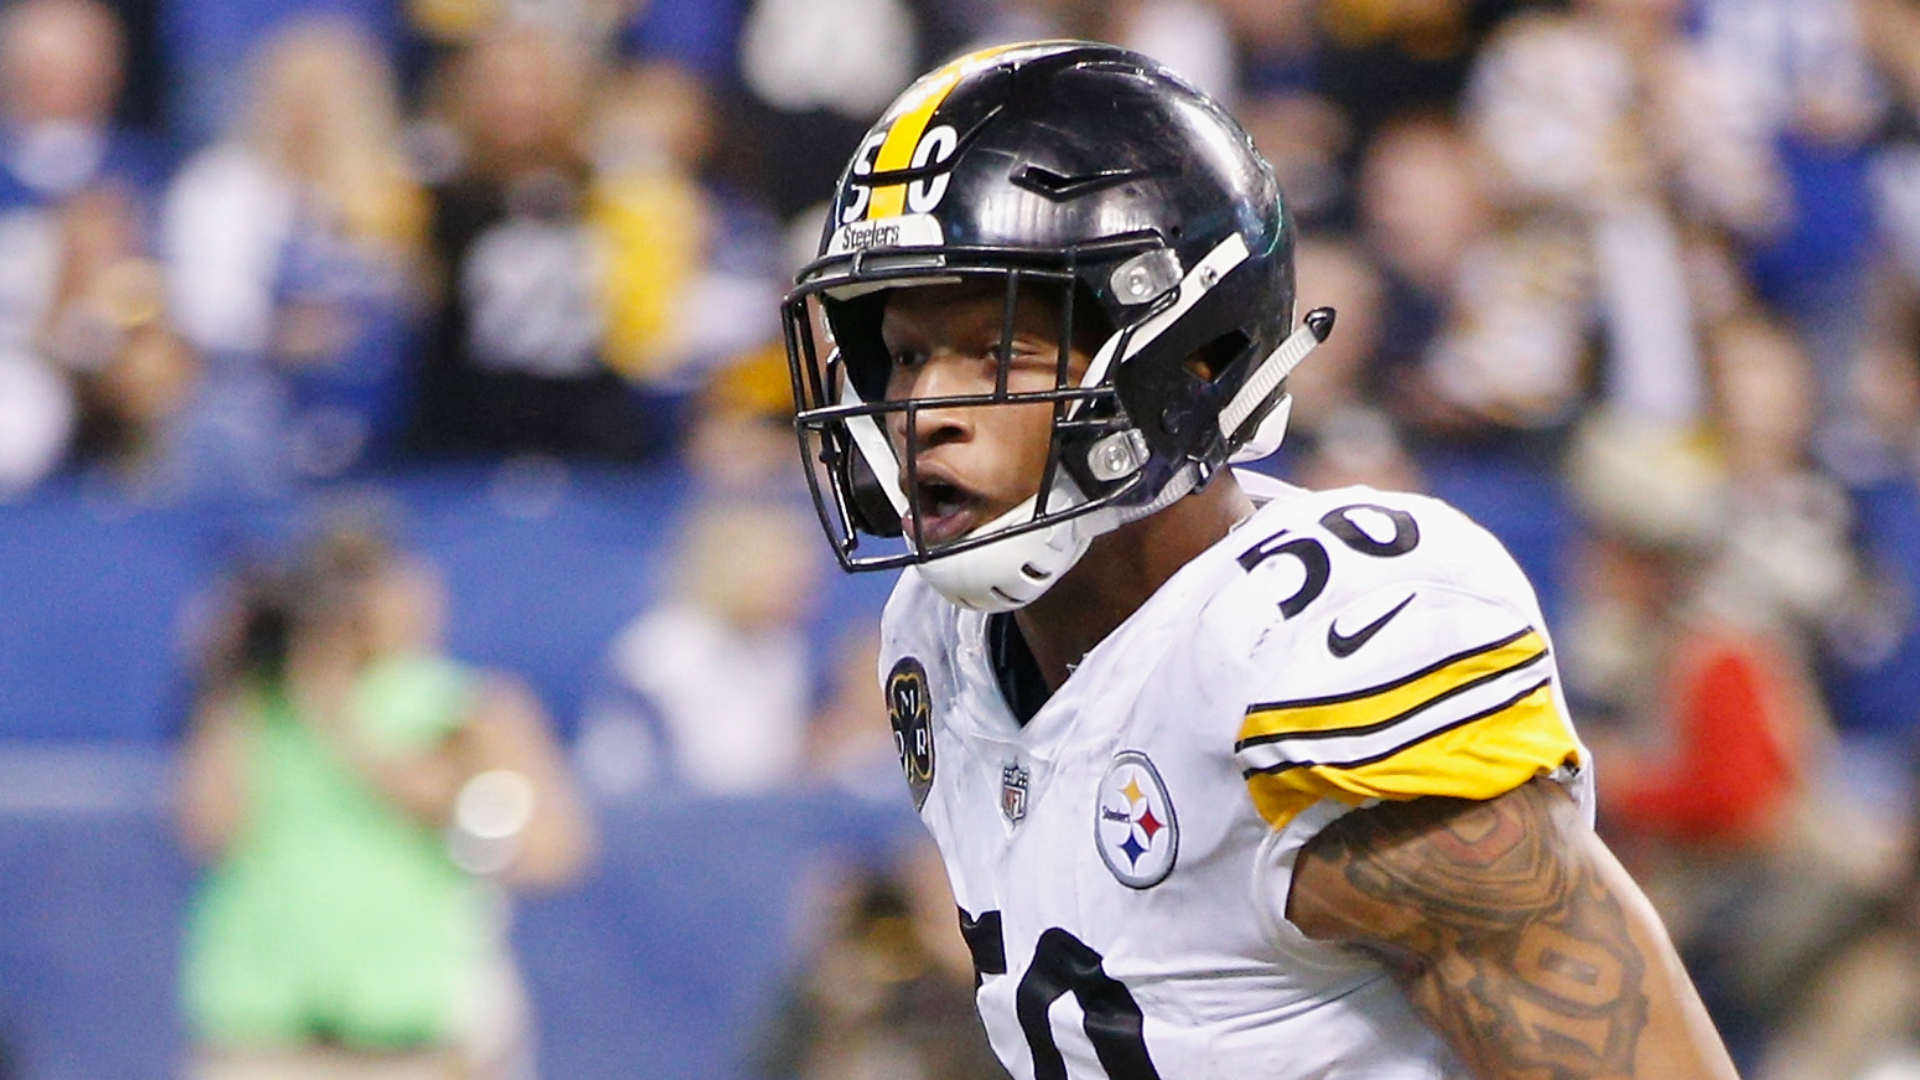 Steelers LB Ryan Shazier transported to hospital after scary back injury